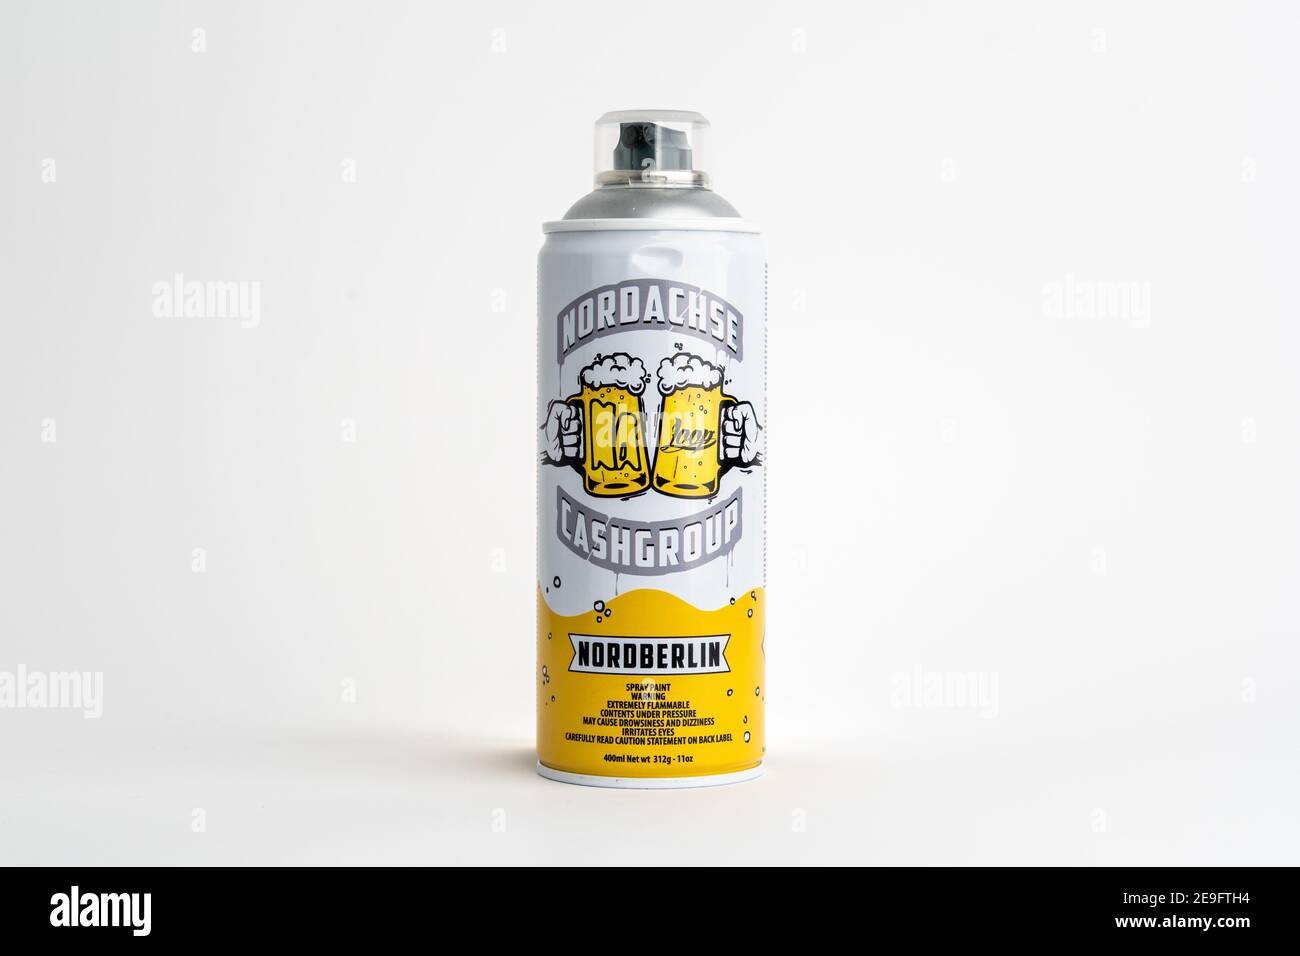 Loopcolors collaboration with Nordachse Nordberlin beer. Limited 400 ml graffiti spray paint can in silver with the logo design in front of a white BG Stock Photo